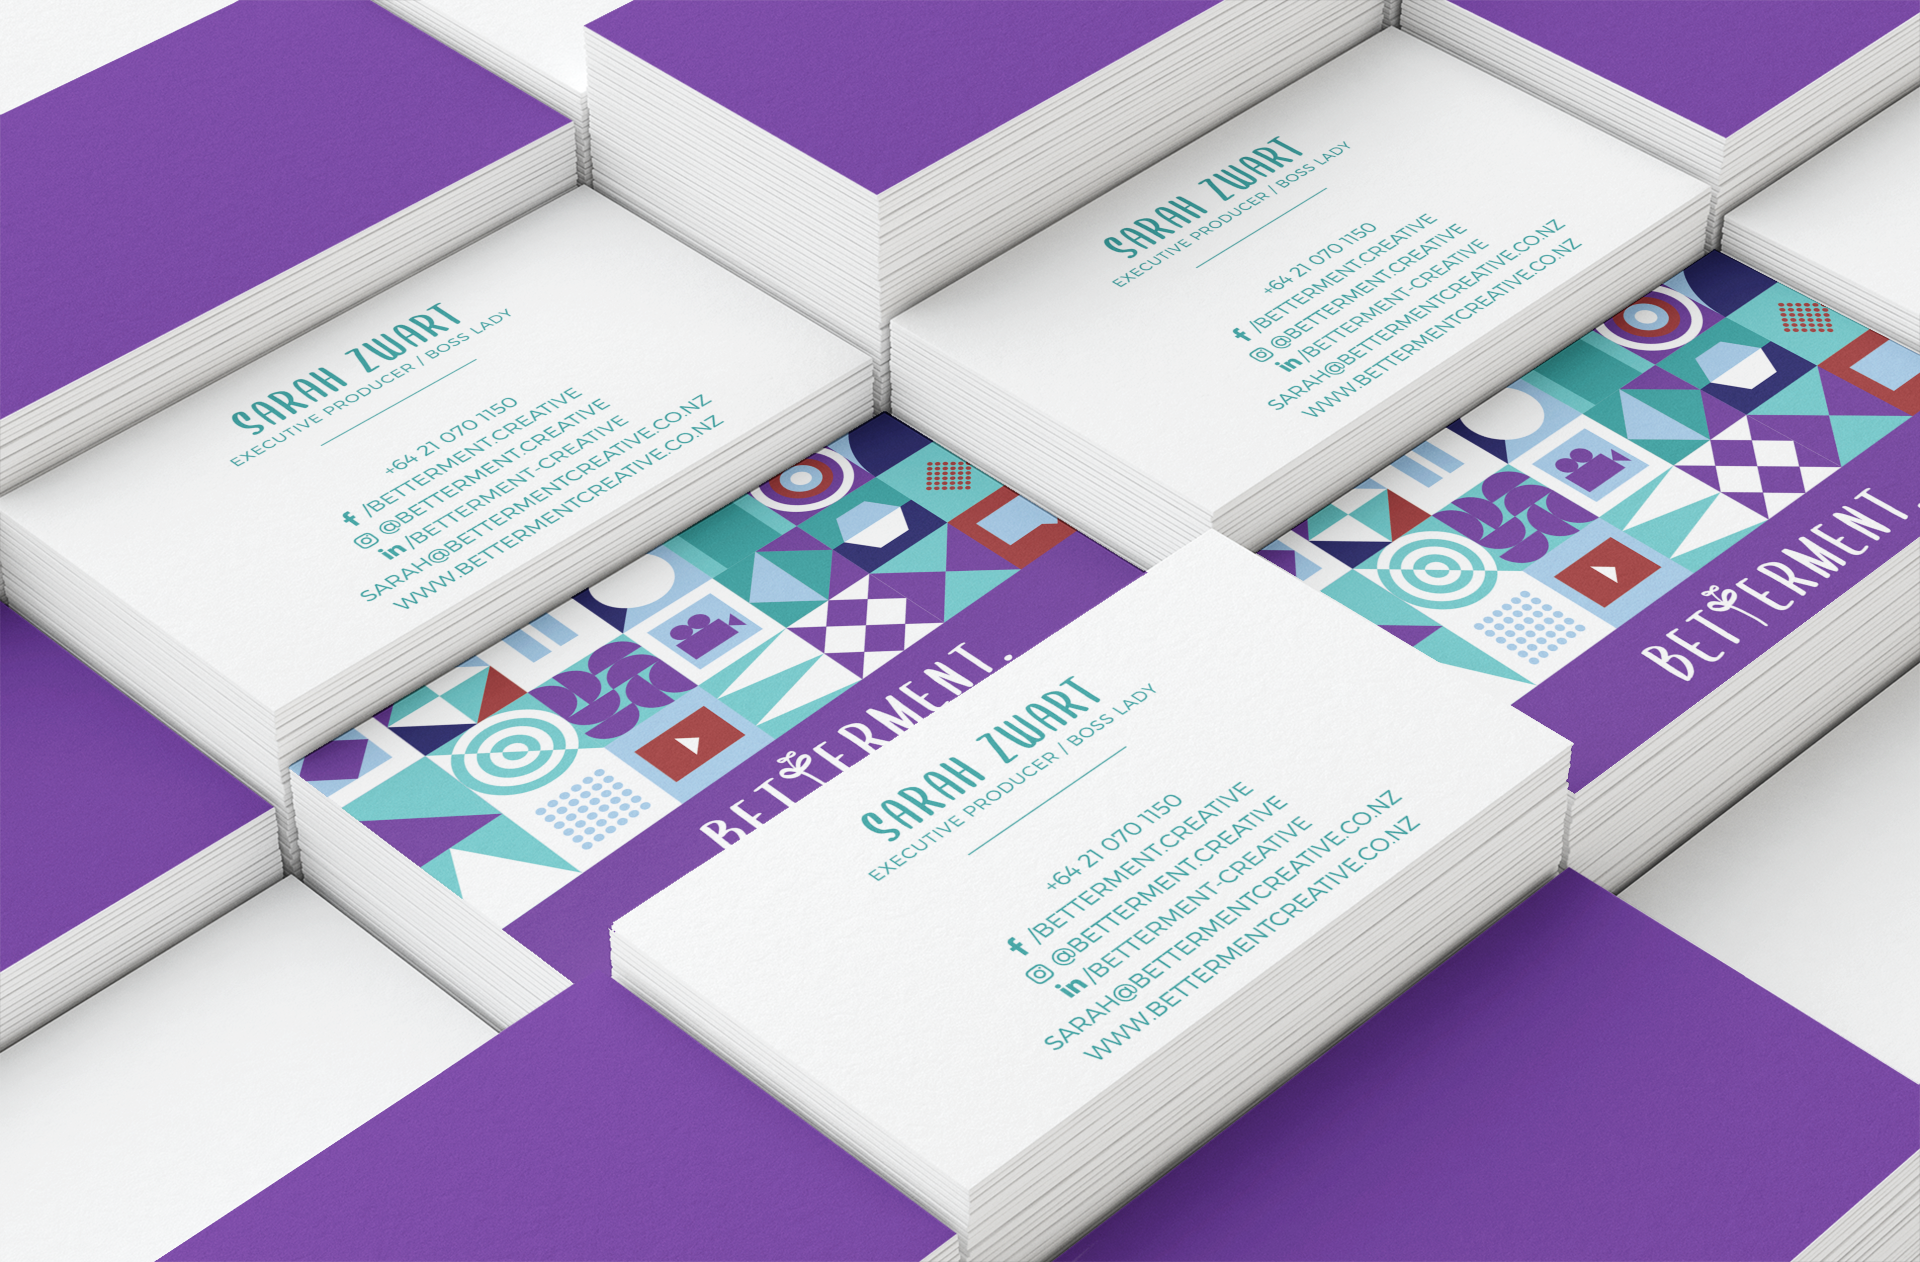 mockup-of-different-sized-piles-of-business-cards-42-el.png